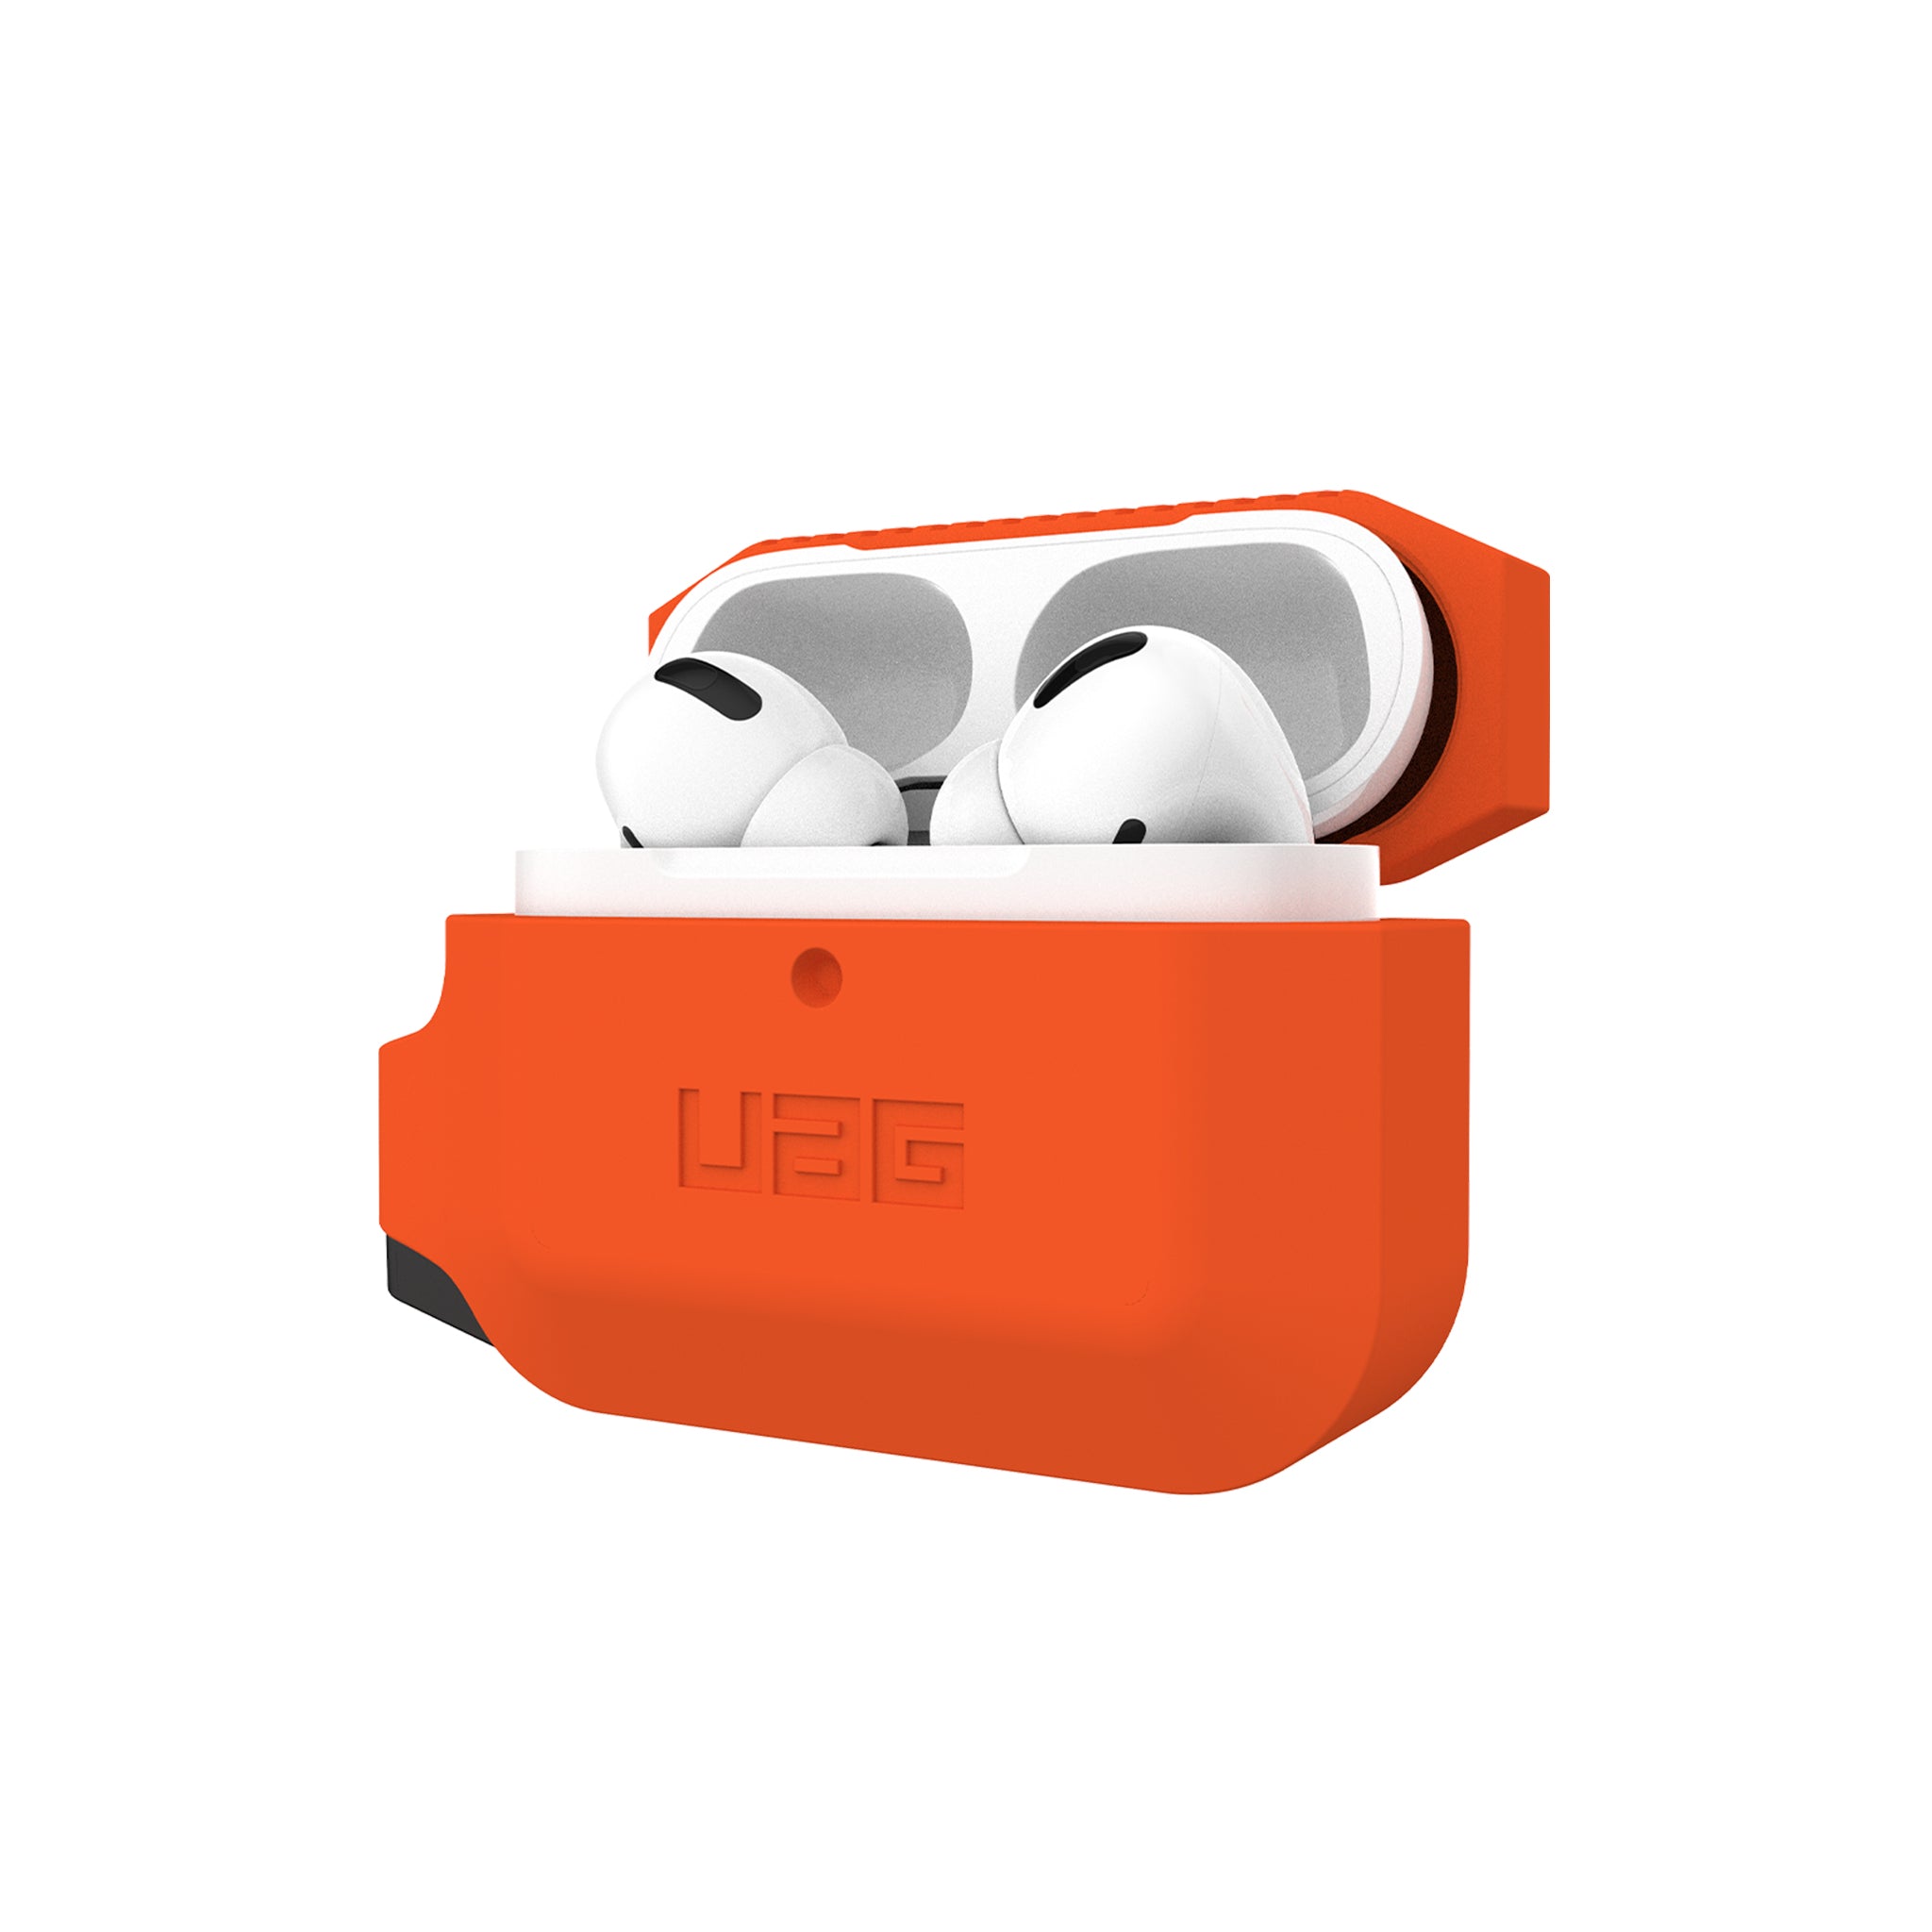 Urban Armor Gear (uag) - Silicone Case For Apple Airpods Pro - Orange And Black